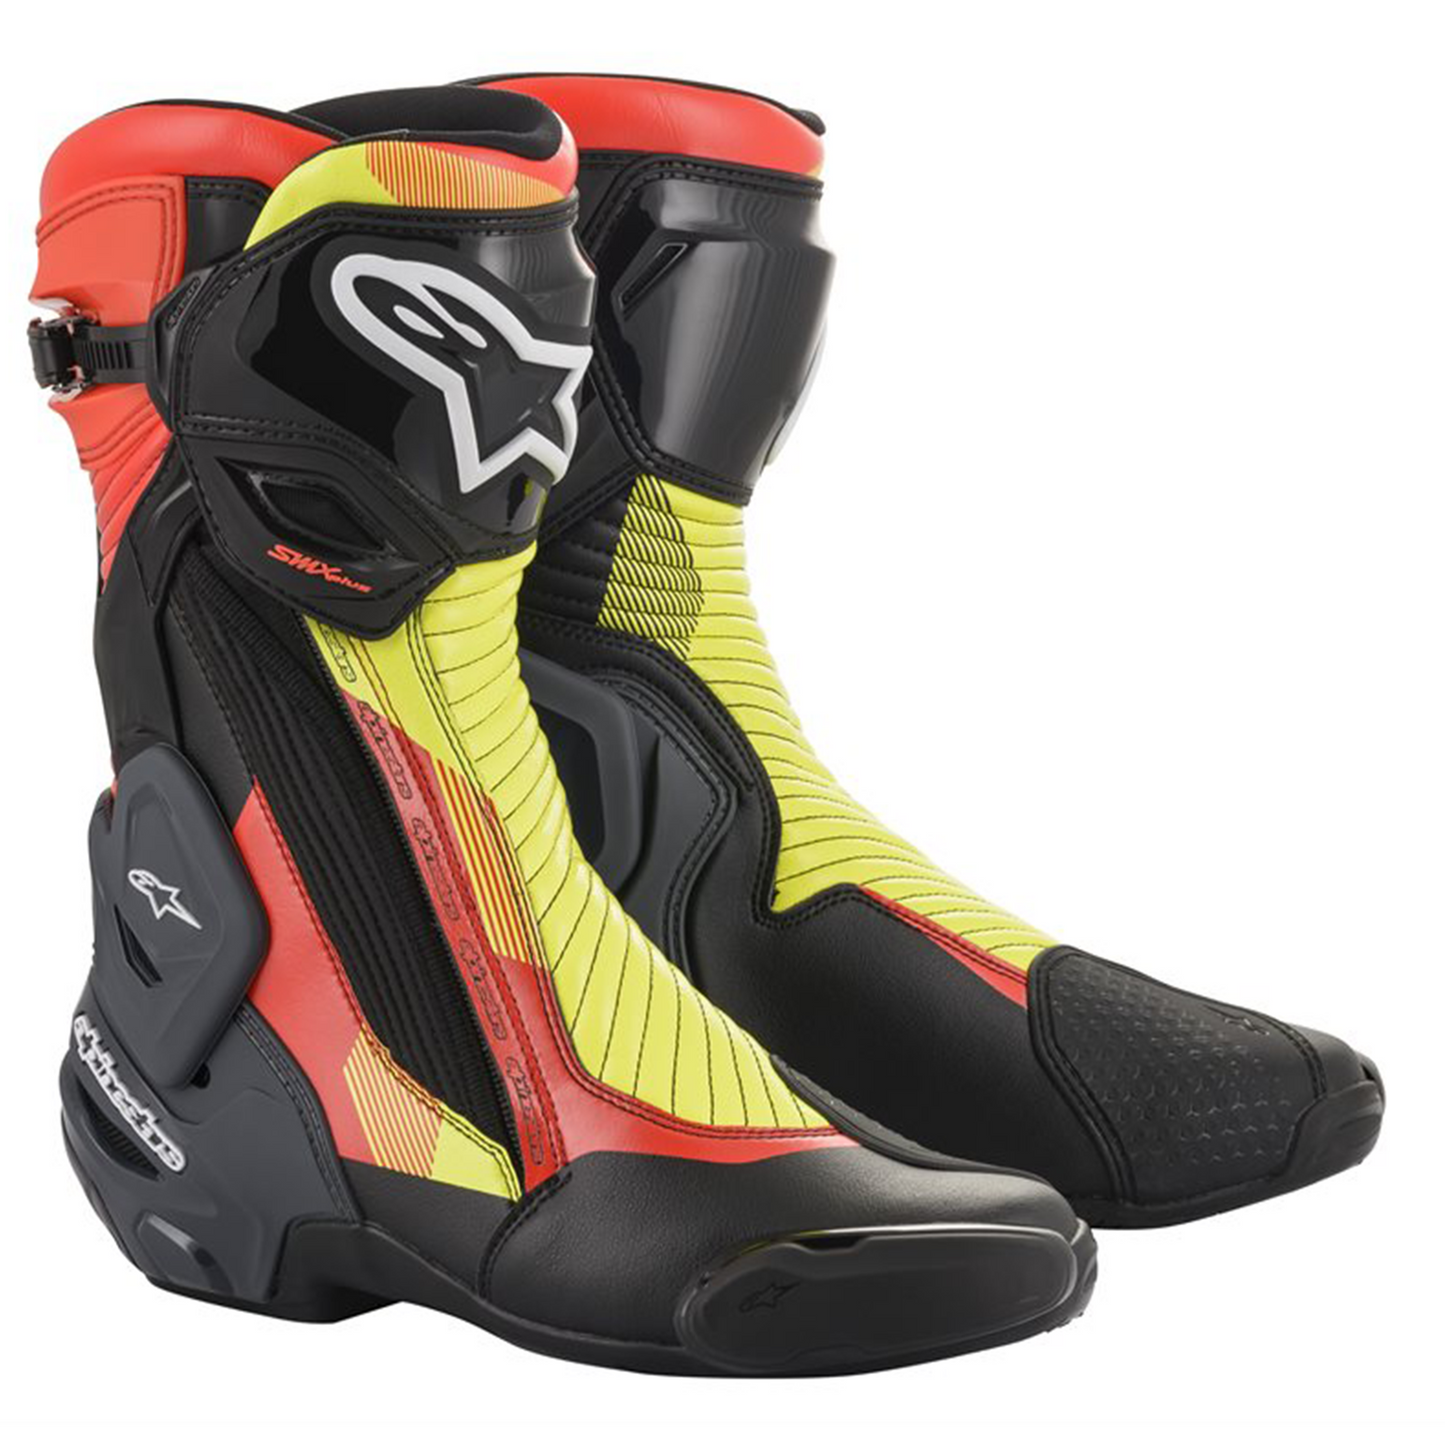 Alpinestars SMX Plus V2 Boots - Black/Red Fluo/Yellow Fluo/Grey - (1351)